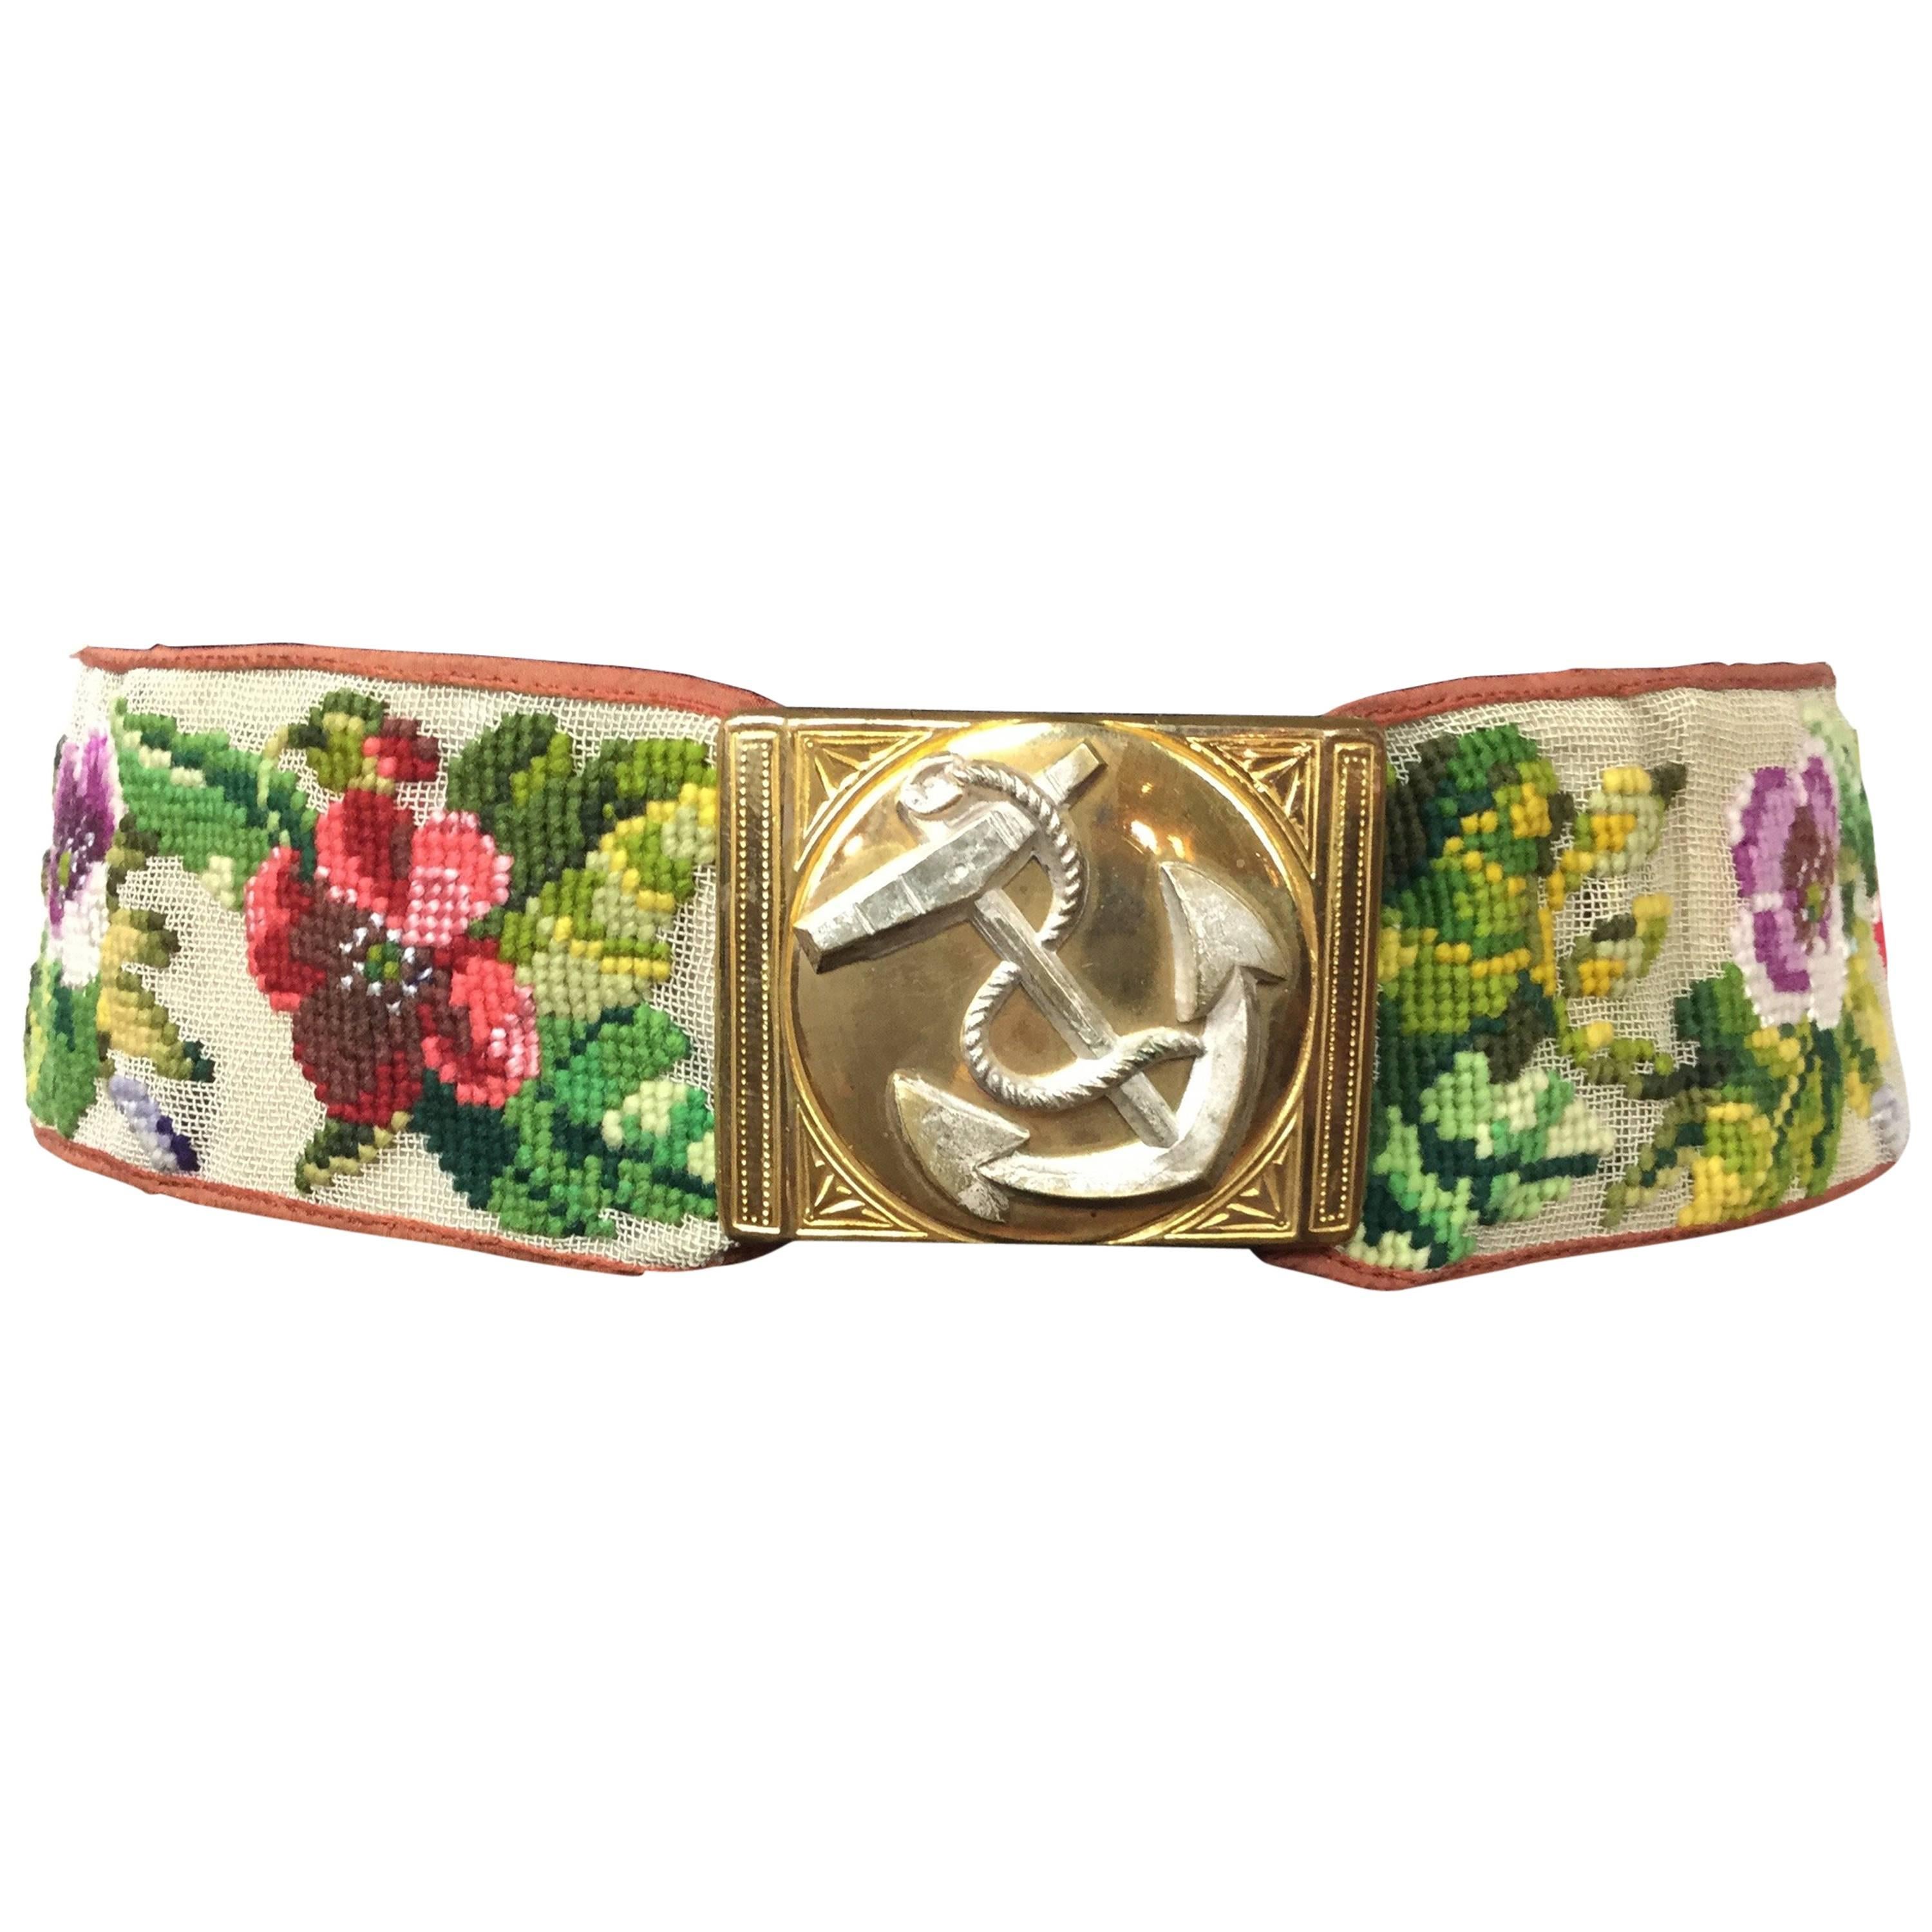 Rare Victorian Berlin Wool Work Floral Belt. Hand Stitched. 1870's. For Sale